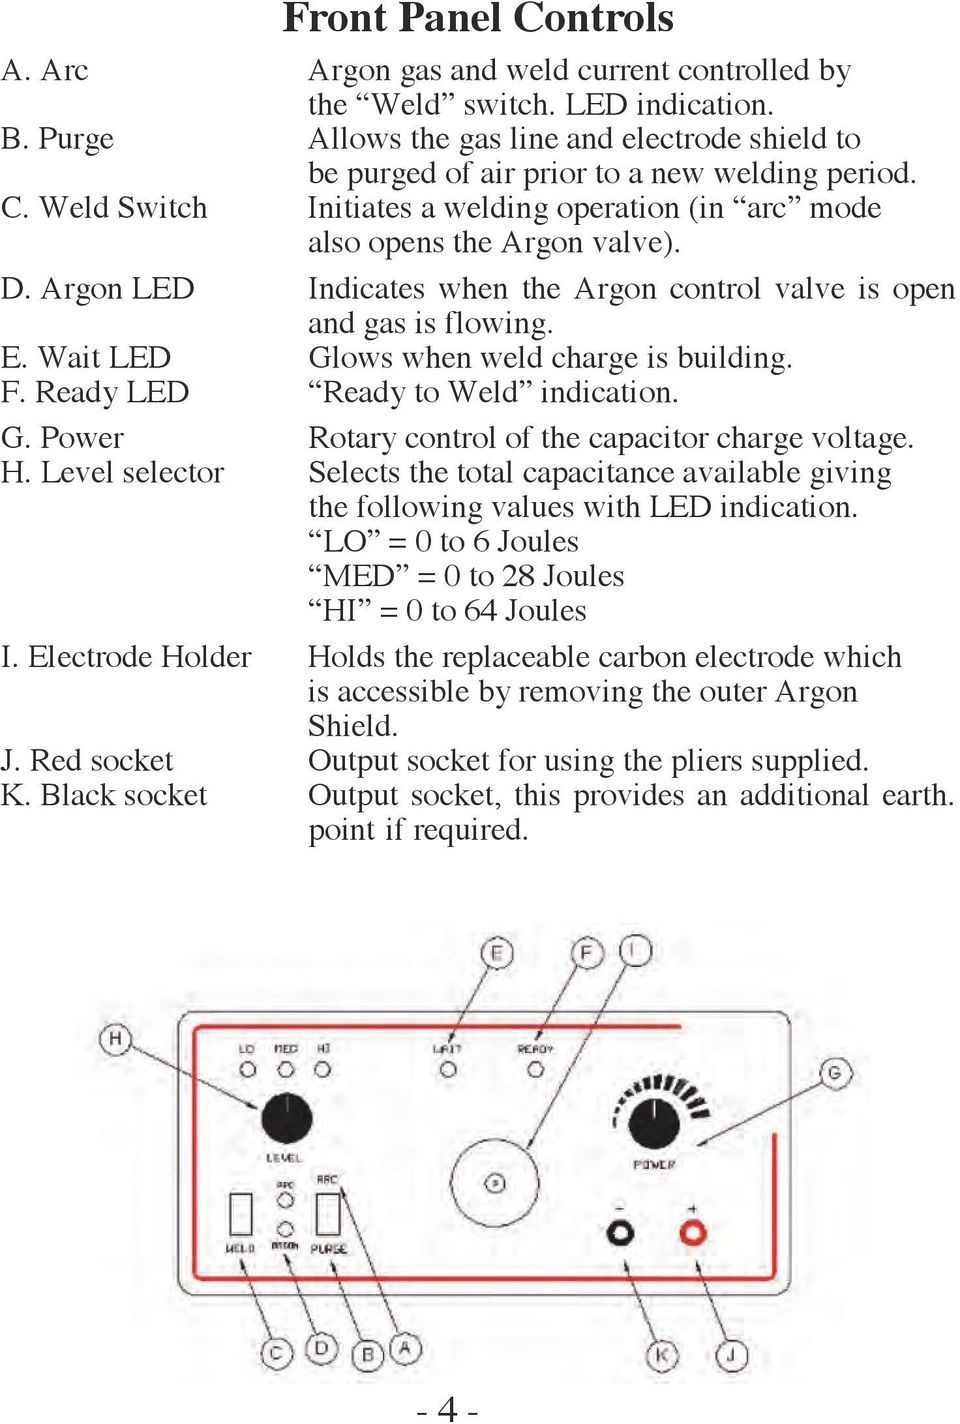 Argon LED Indicates when the Argon control valve is open and gas is flowing. E. Wait LED Glows when weld charge is building. F. Ready LED Ready to Weld indication. G. Power Rotary control of the capacitor charge voltage.